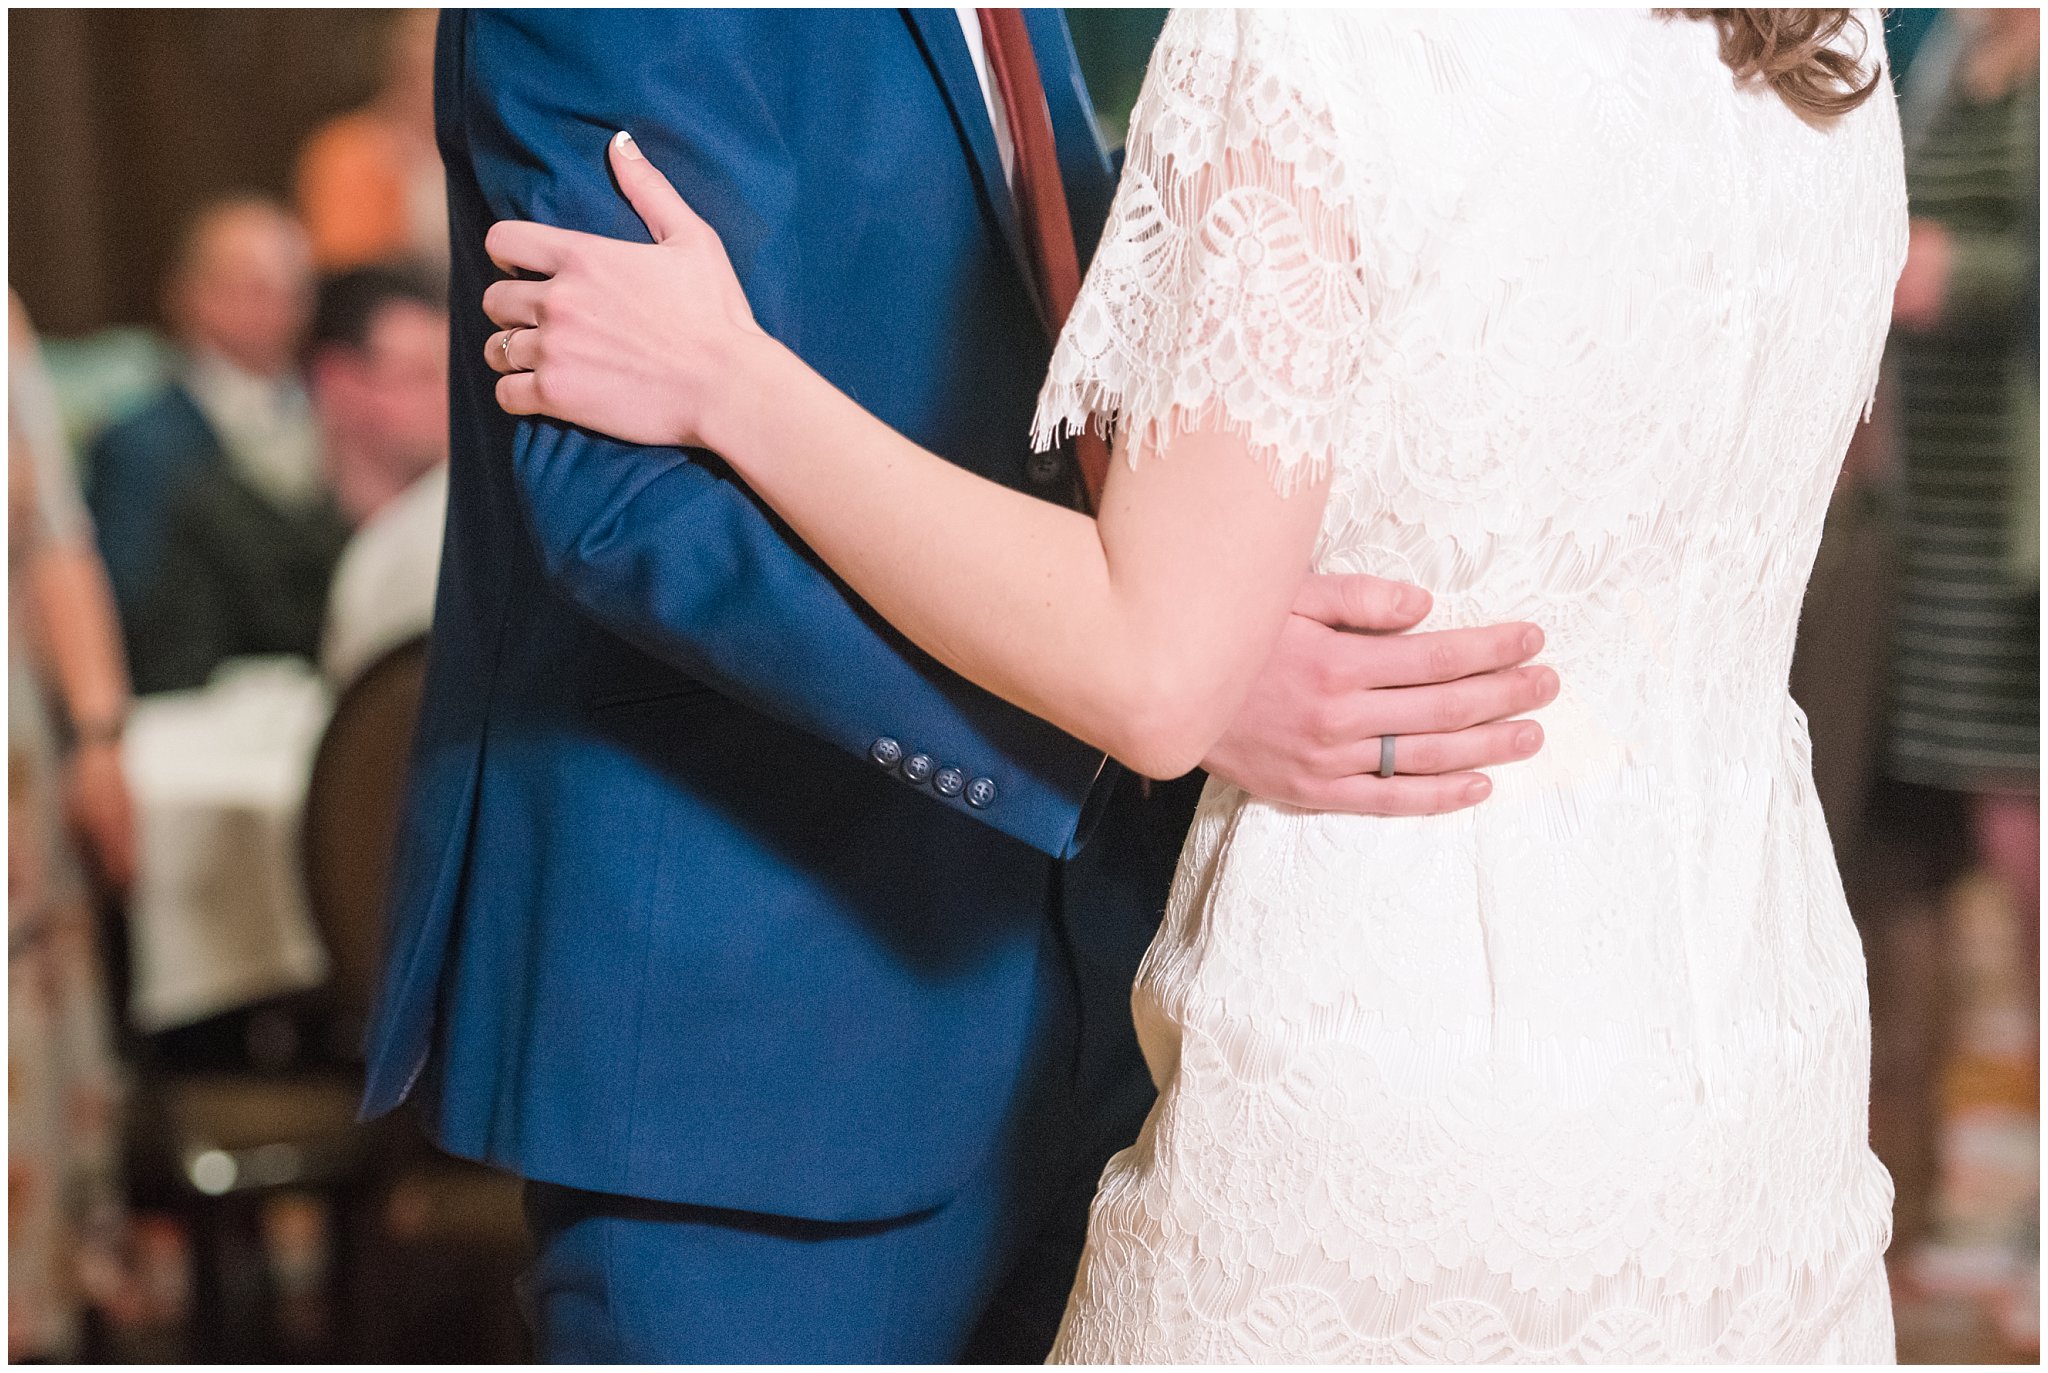 Bride and groom first dance at the Empire Room at Joseph Smith Memorial Building | navy and burgundy colors | Bountiful Temple Wedding and Joseph Smith Memorial Reception | Jessie and Dallin Photography